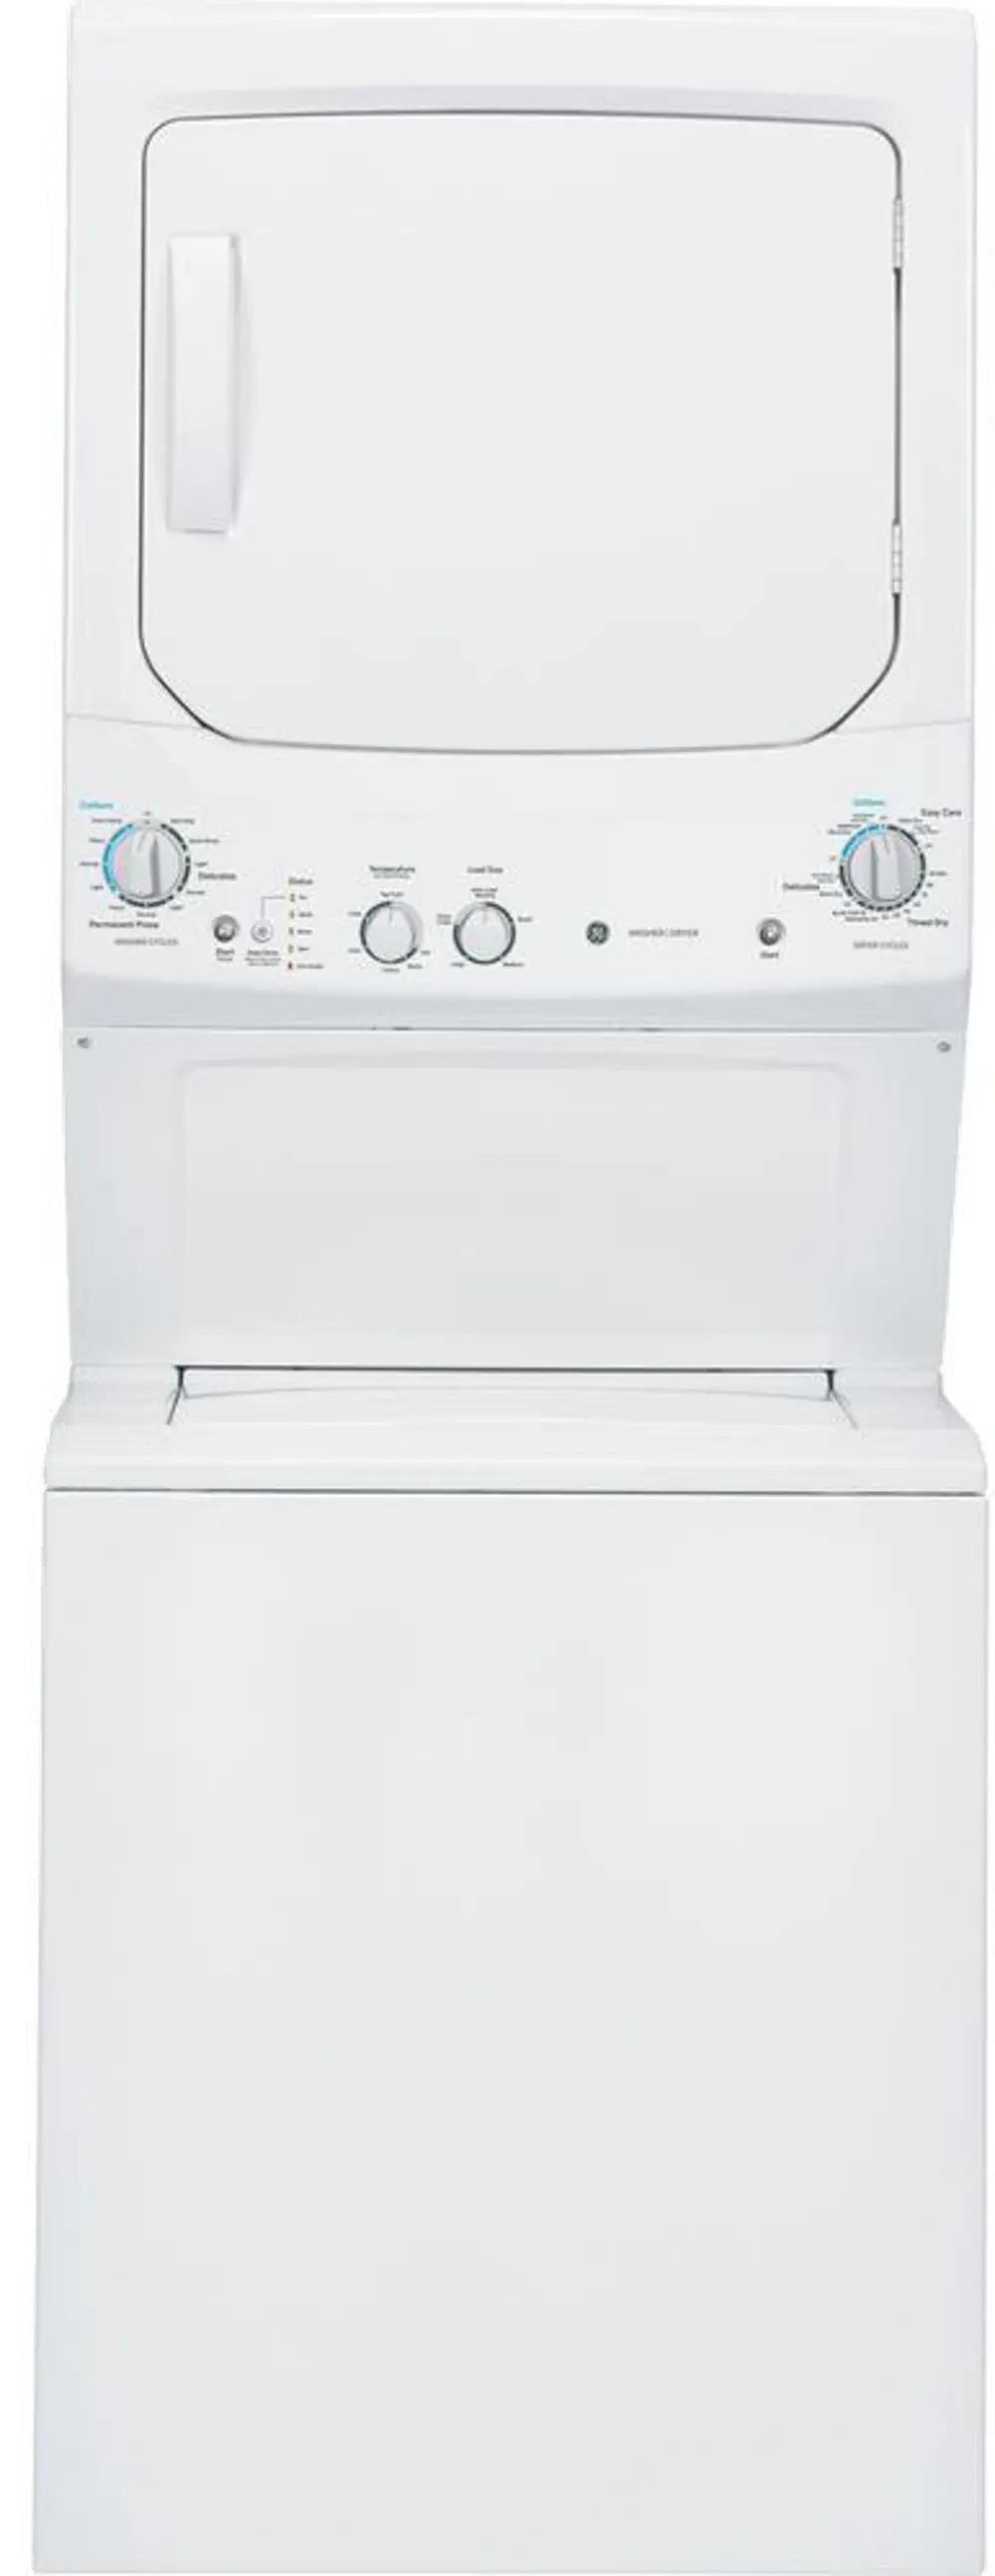 GUD27GSSMWW GE Spacemake Washer and Dryer Laundry Combo - White-1